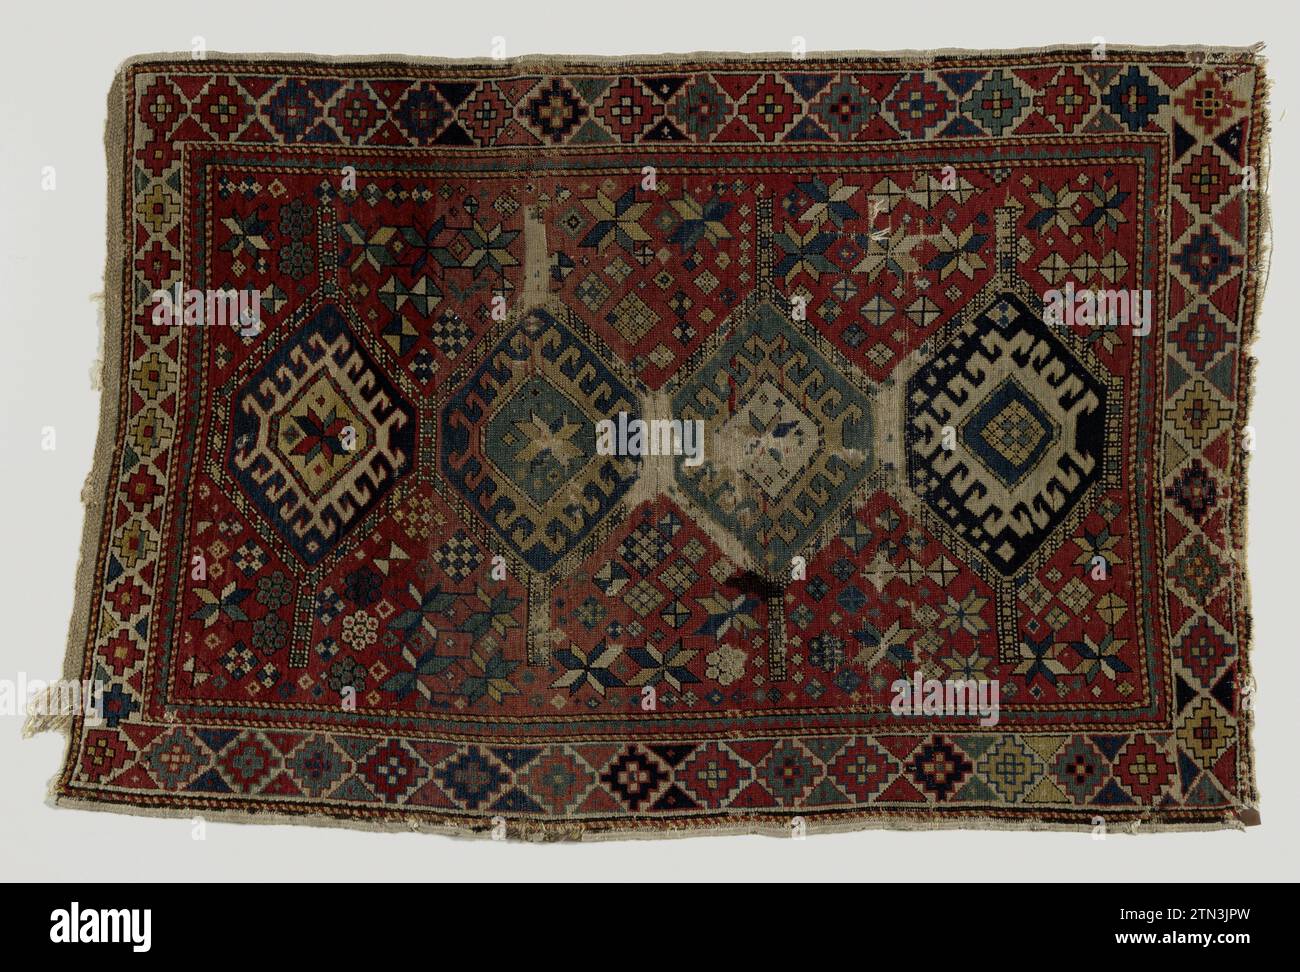 Carpet, kazak, with medallion pattern ,, c. 1800 - c. 1900 Carpet, Kazak, with medallion pattern. Midfield: on a red stock that is strewn with stars and blocks, there are four hexagonal medallions in the length axis, two of ultramarine, one of cobalt blue and one of light green with window and hooks. Edges: A white stock is divided by lateral triangles in red, ultramarine, yellow, orange and green in diamond fields, on which angular rosettes are. Inner zoom from interlocking triangles of red and green. State: entered with moths, larvae, etc. Cleaned in the snow. With large ink stain. Holes in Stock Photo